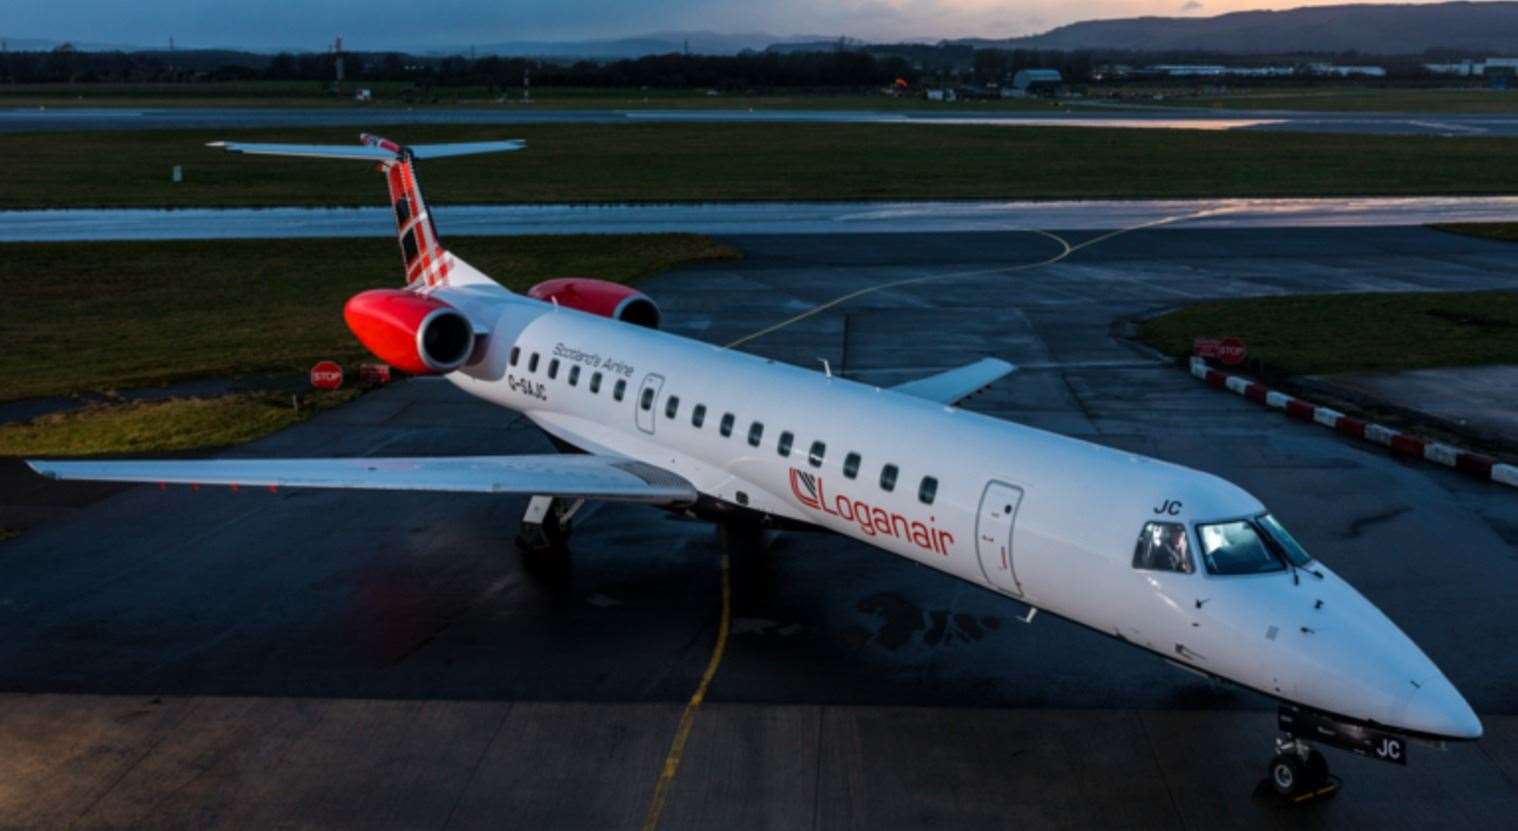 Loganair has said it may need to seek government help to shore up the business.